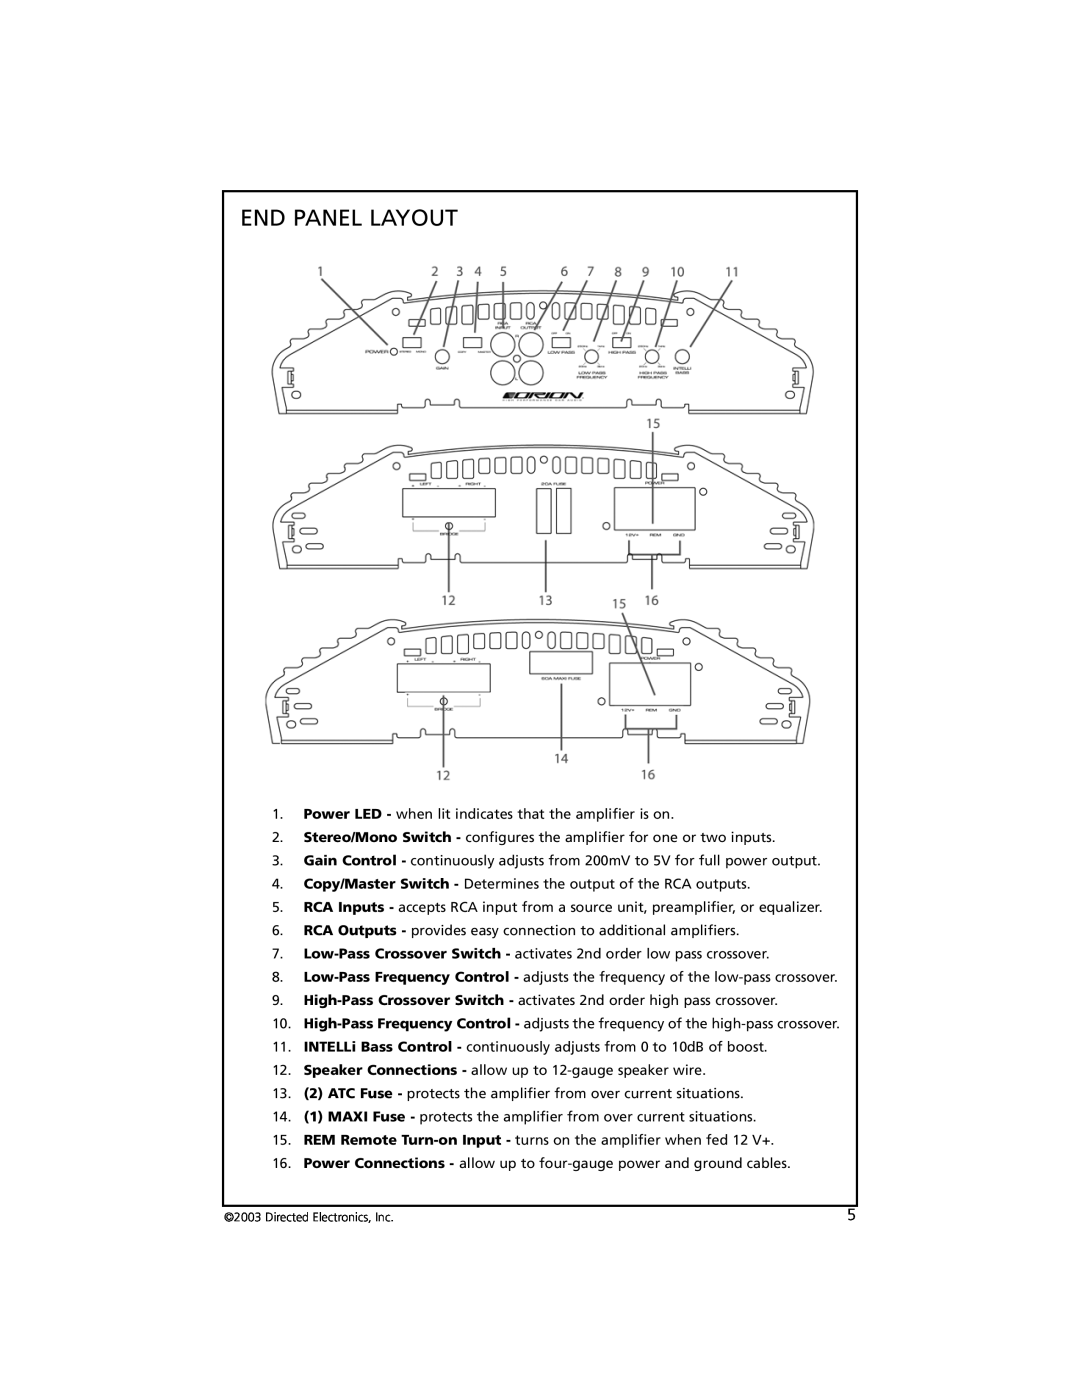 Orion Car Audio 6002, 4002 manual End Panel Layout 